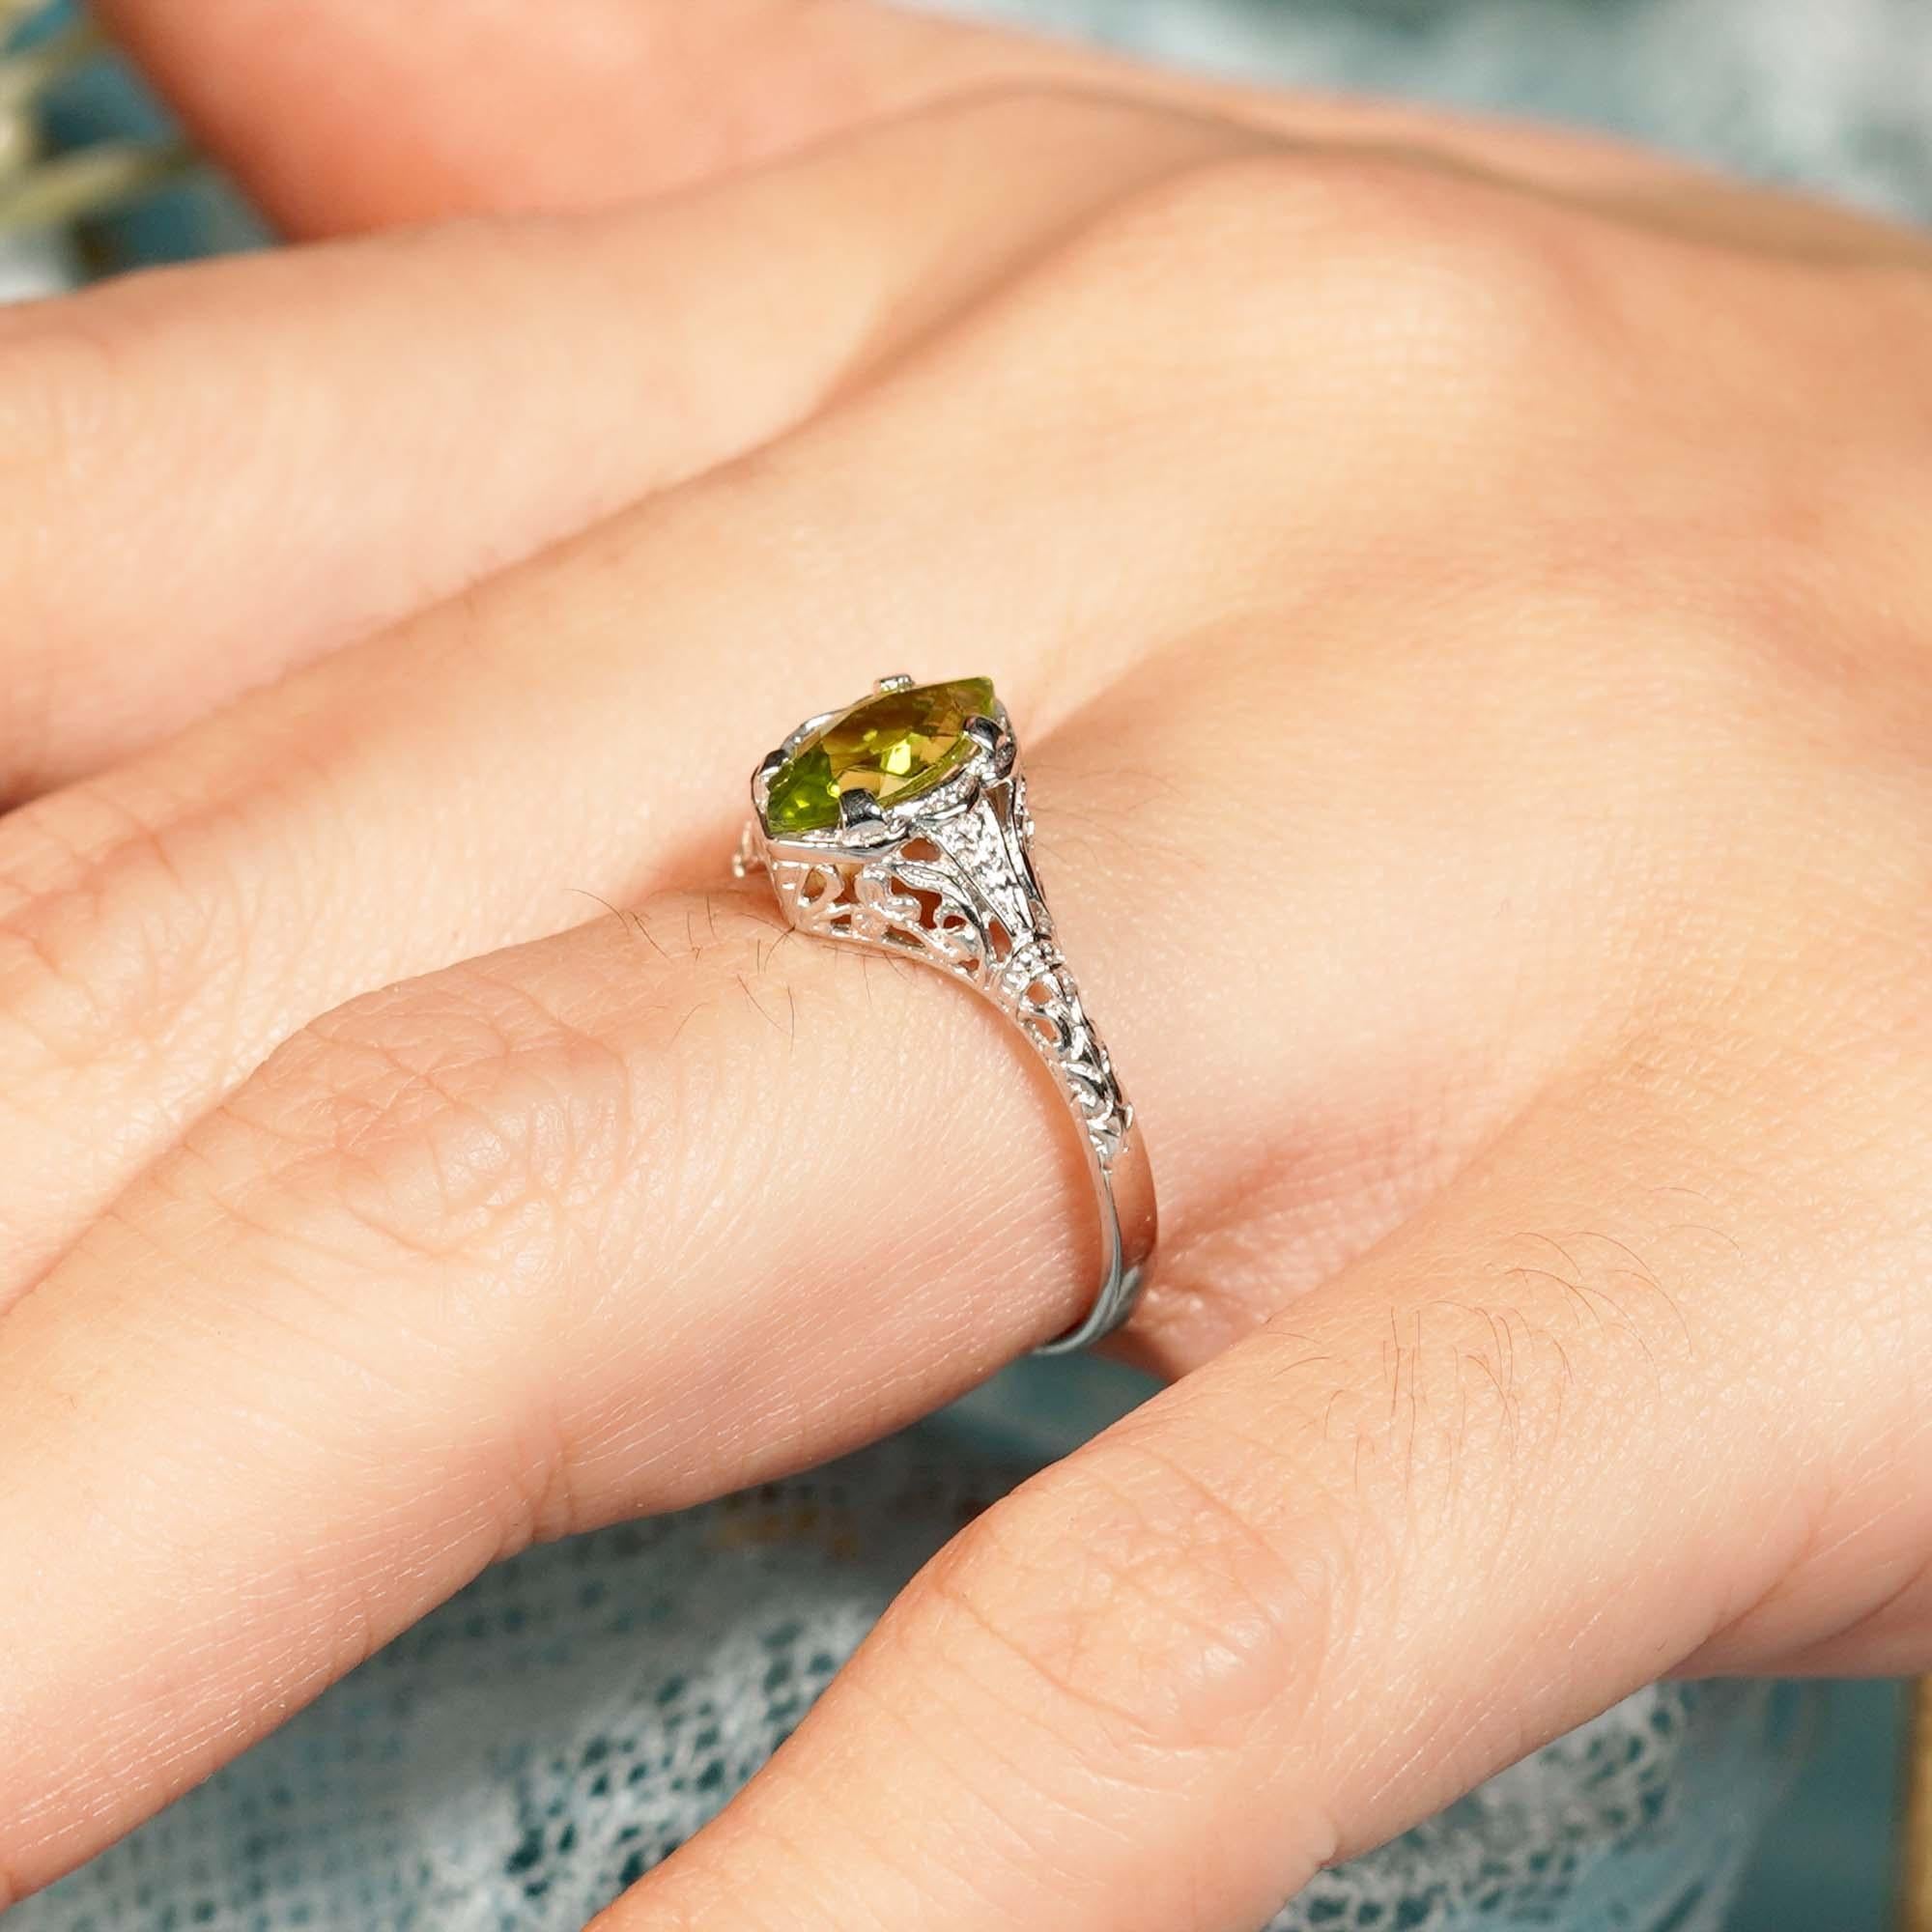 For Sale:  Natural Marquise Peridot Vintage Style Filigree Ring in Solid 9K White Gold 10